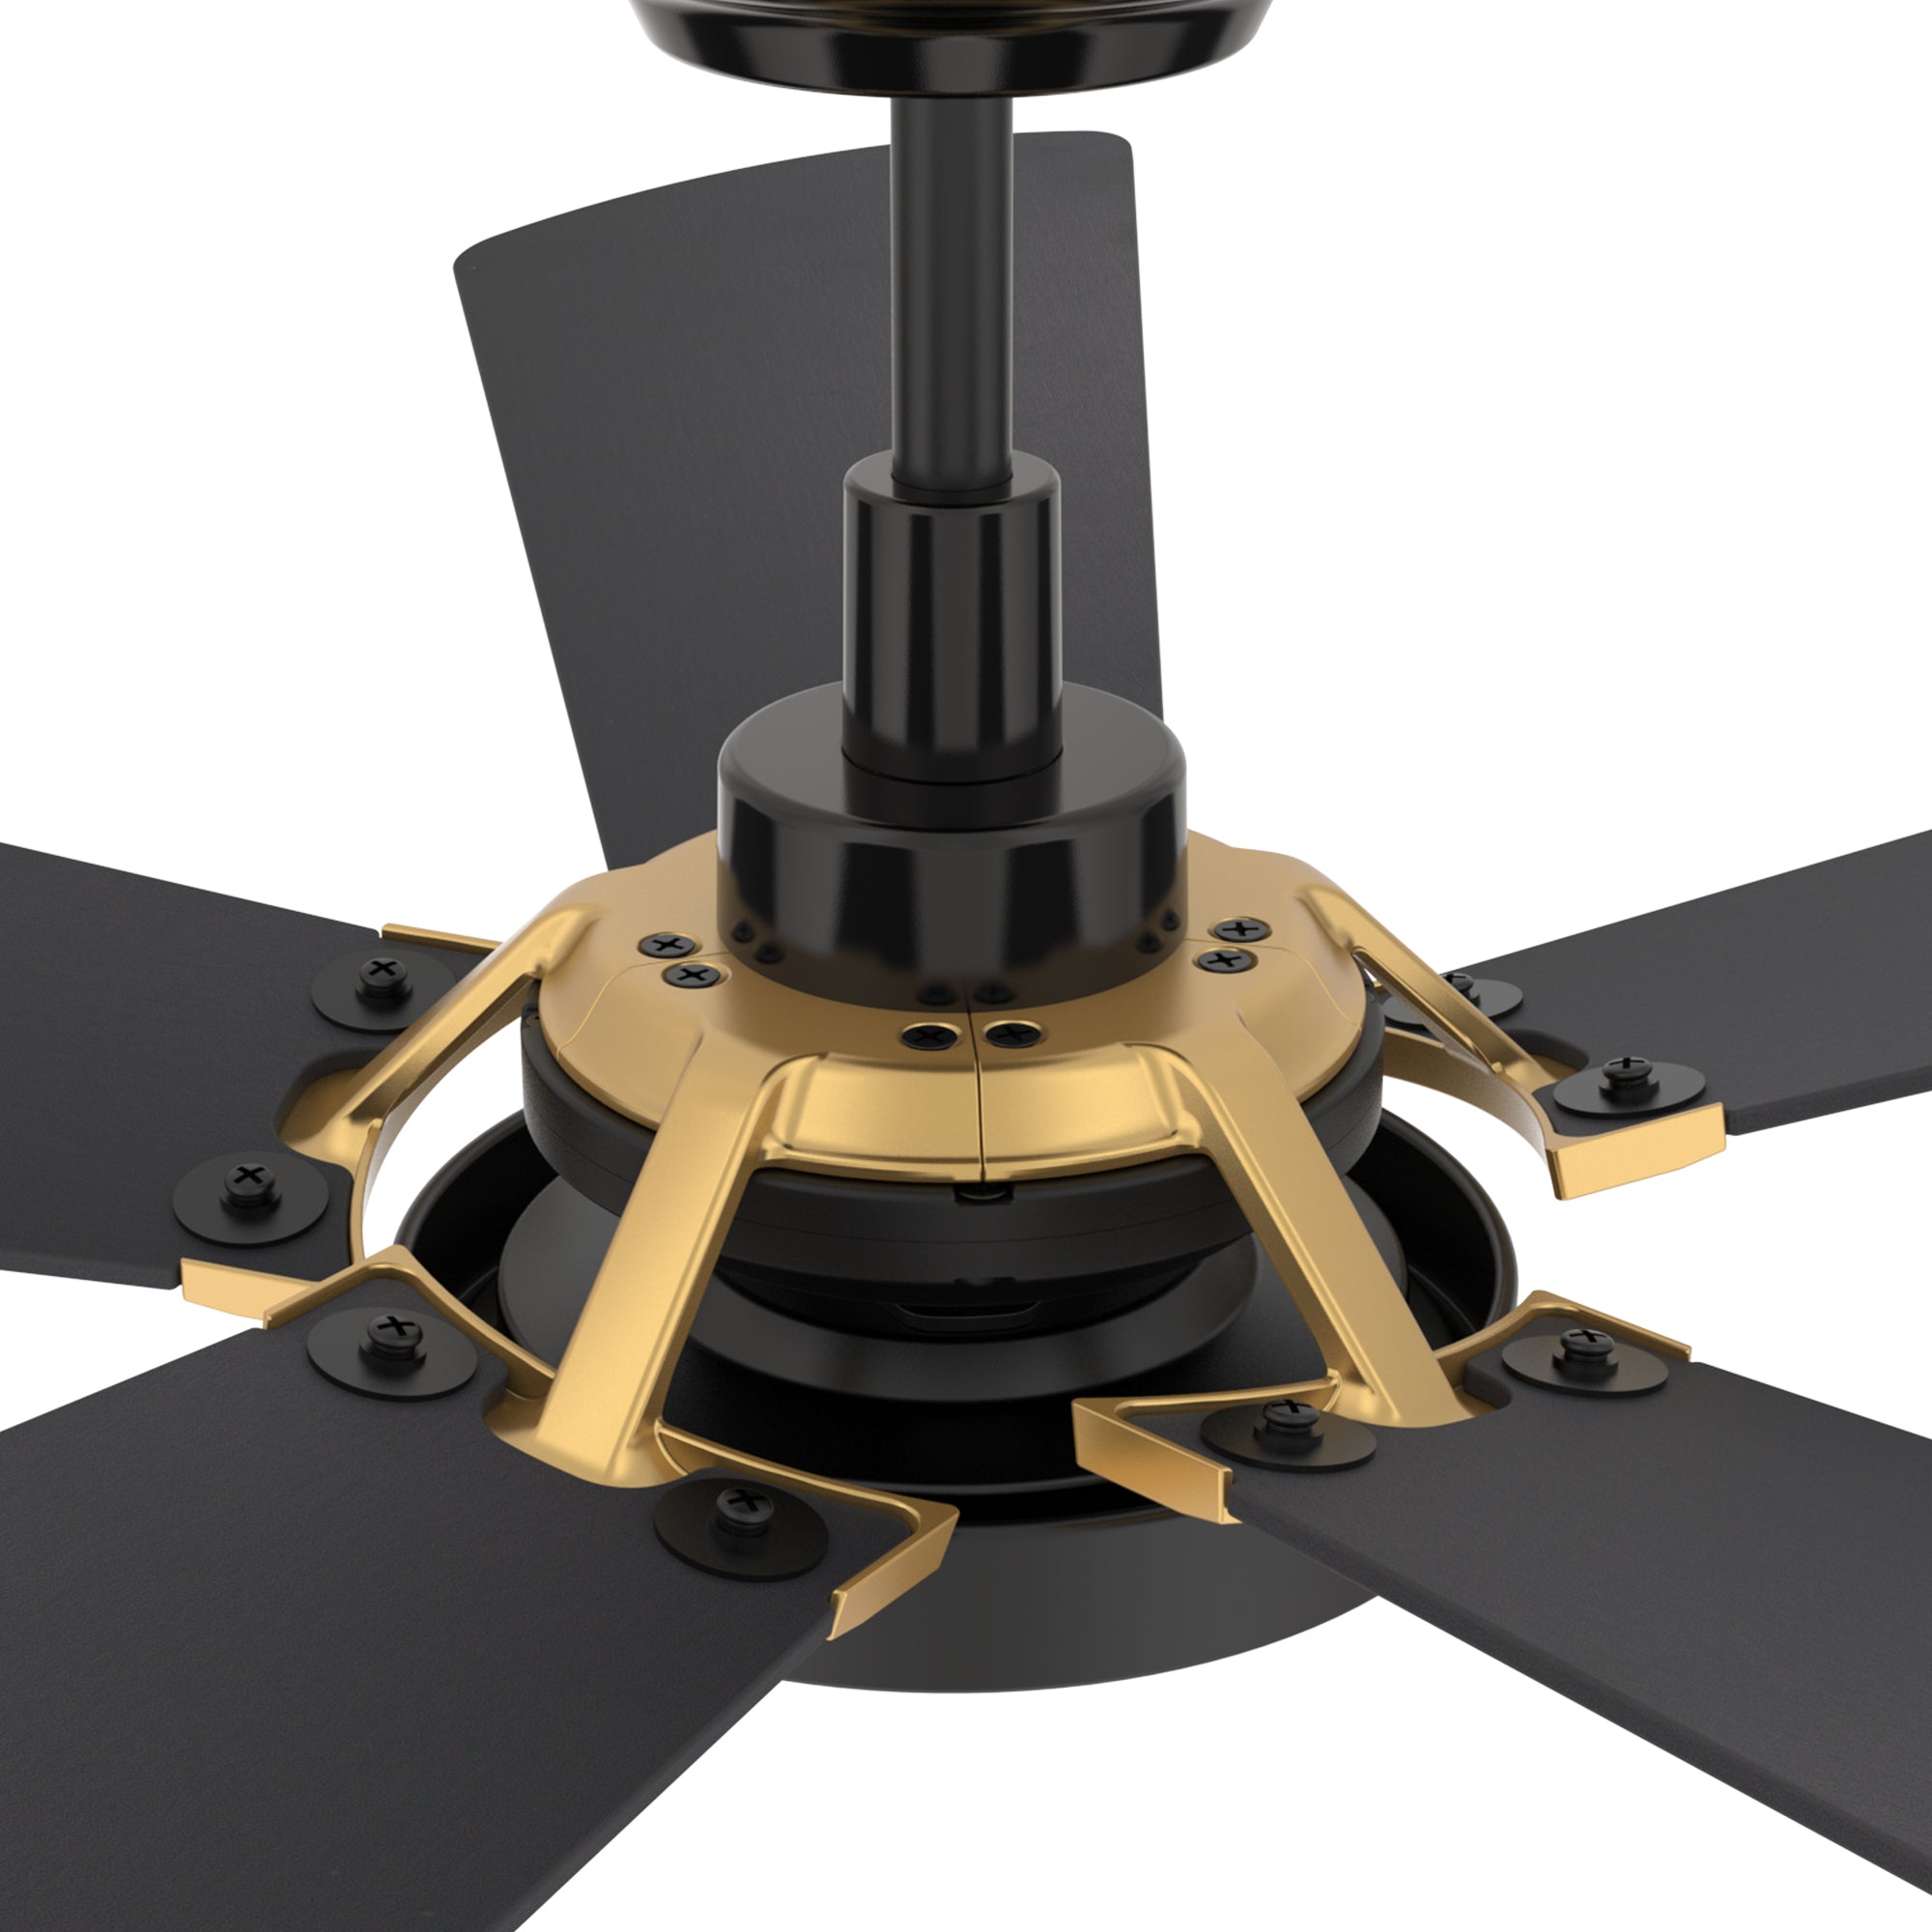 This Smafan Wilkes 56&#39;&#39; smart ceiling fan keeps your space cool, bright, and stylish. It is a soft modern masterpiece perfect for your large indoor living spaces. This Wifi smart ceiling fan is a simplicity designing with Black finish, use elegant Plywood blades, Glass shade and has an integrated 4000K LED daylight. The fan features Remote control, Wi-Fi apps, Siri Shortcut and Voice control technology (compatible with Amazon Alexa and Google Home Assistant ) to set fan preferences.